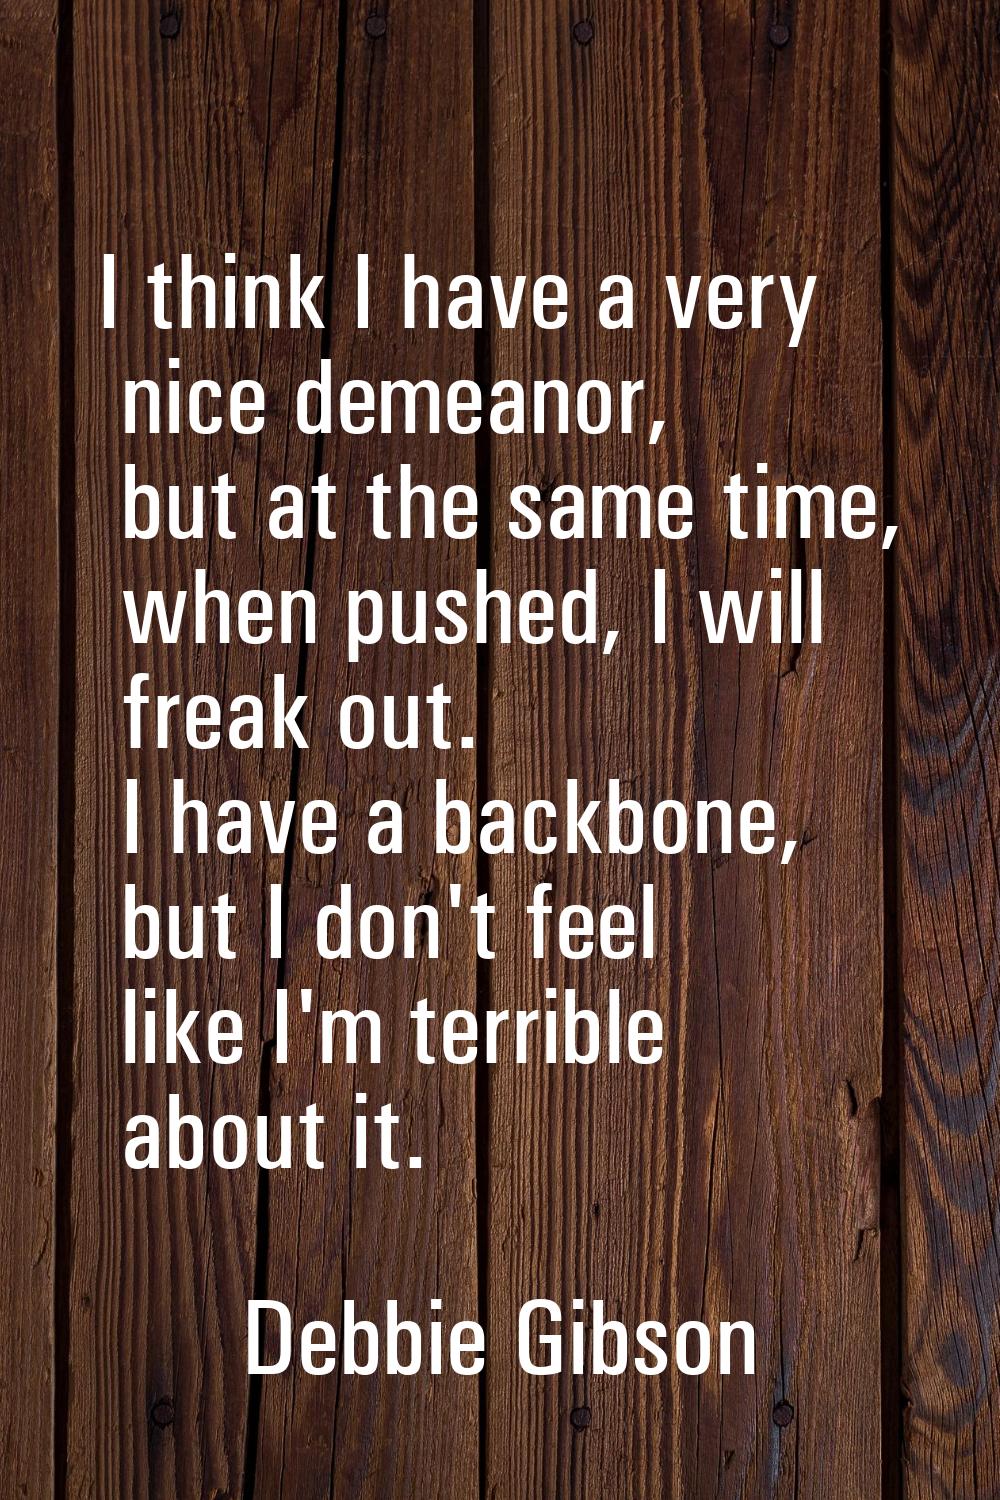 I think I have a very nice demeanor, but at the same time, when pushed, I will freak out. I have a 